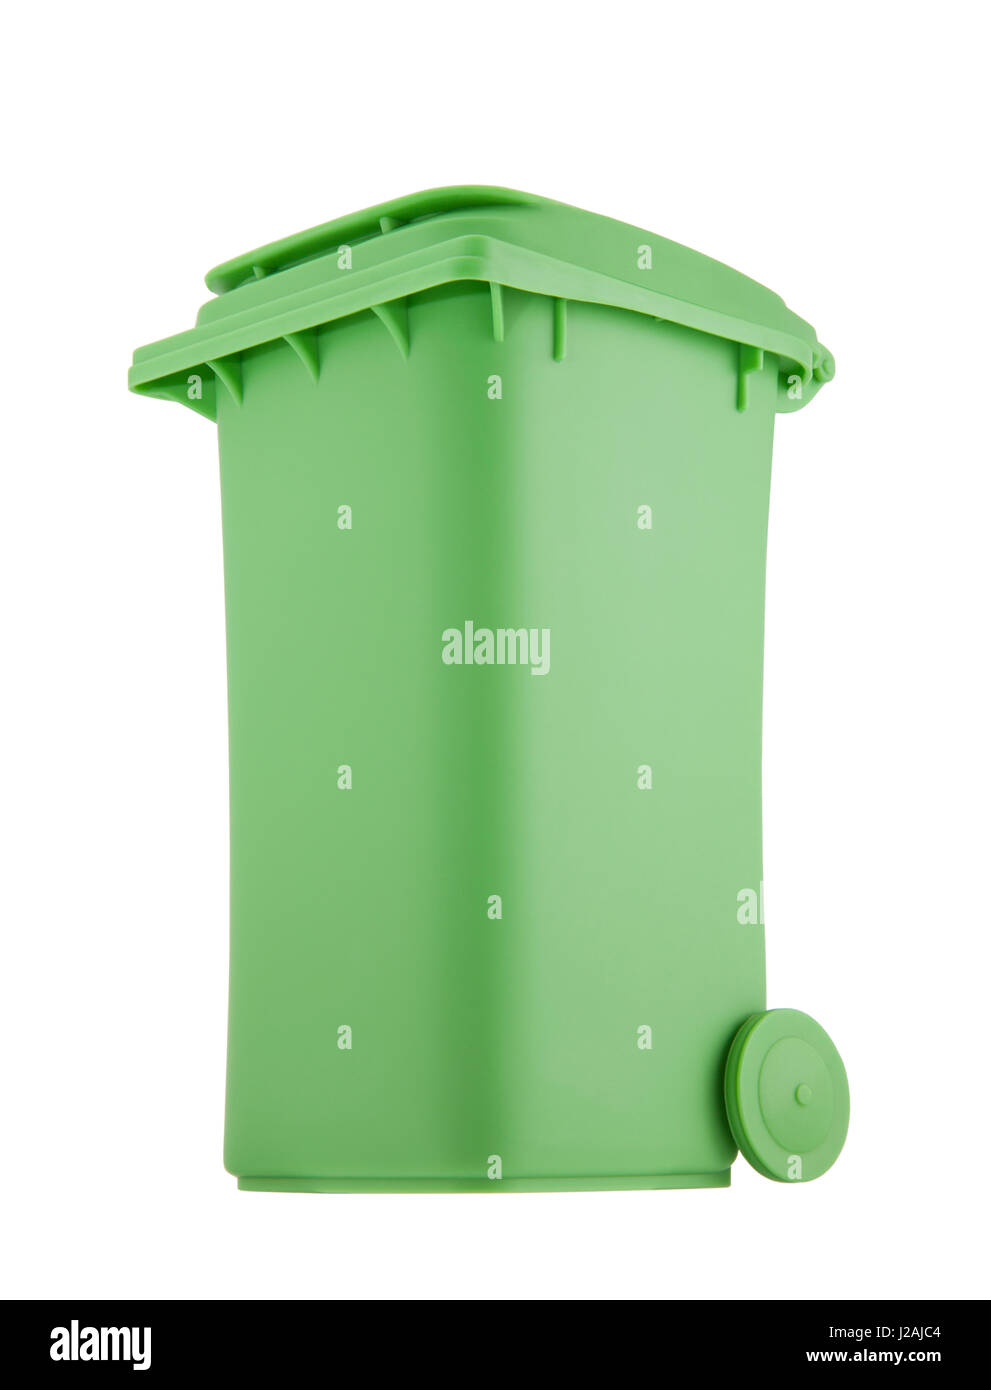 Green recycle bin isolated on white background with clipping path Stock Photo